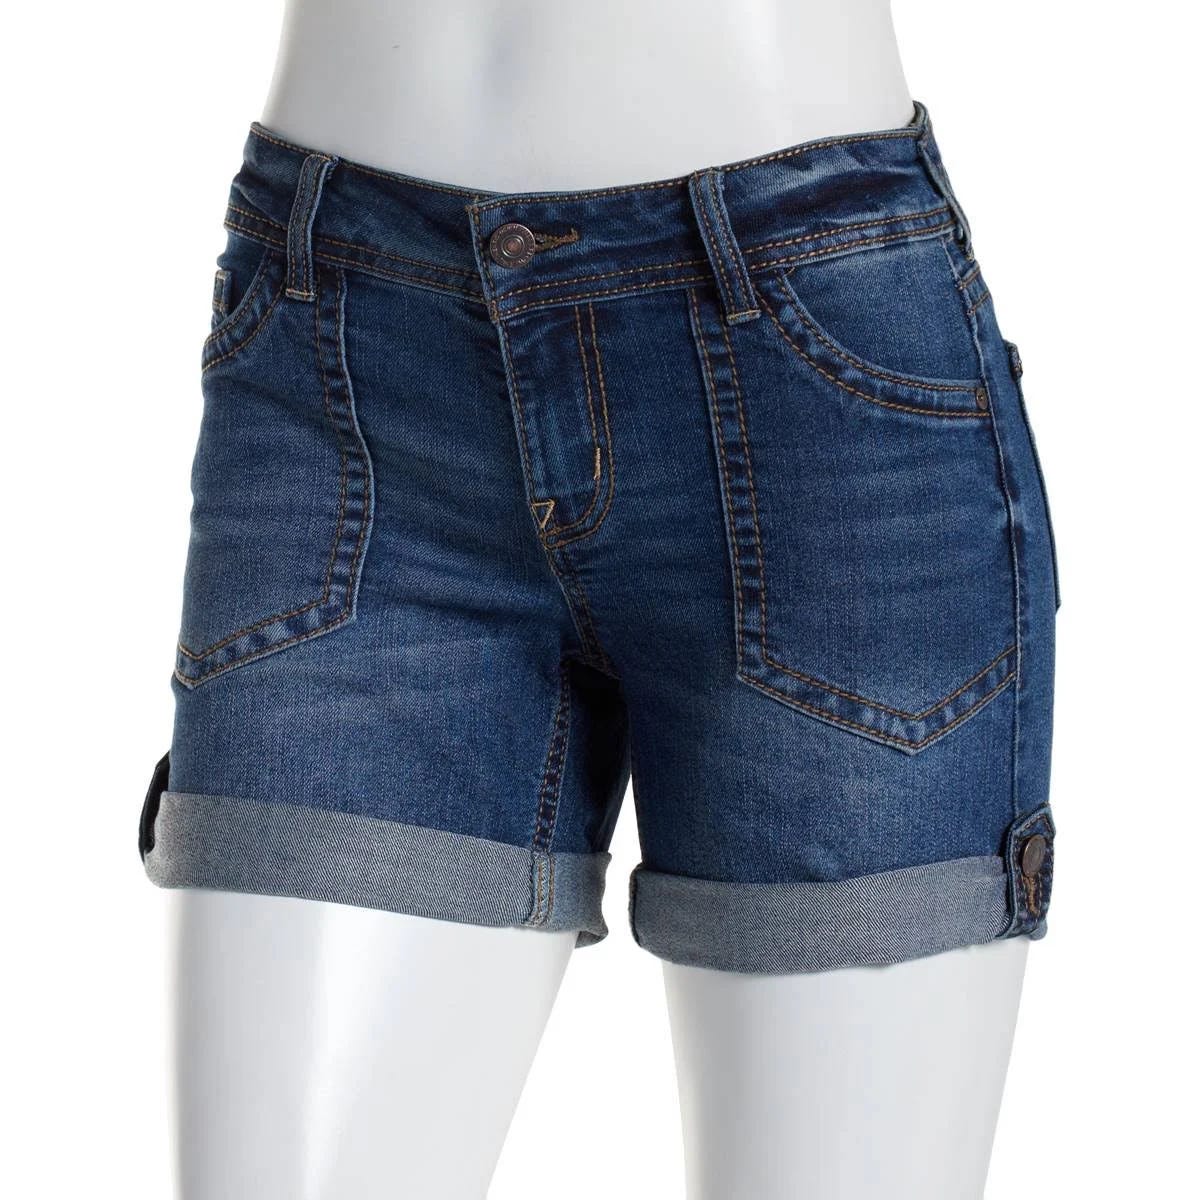 Affordable Fiesty Curvy Denim Shorts with 5 Pockets | Image